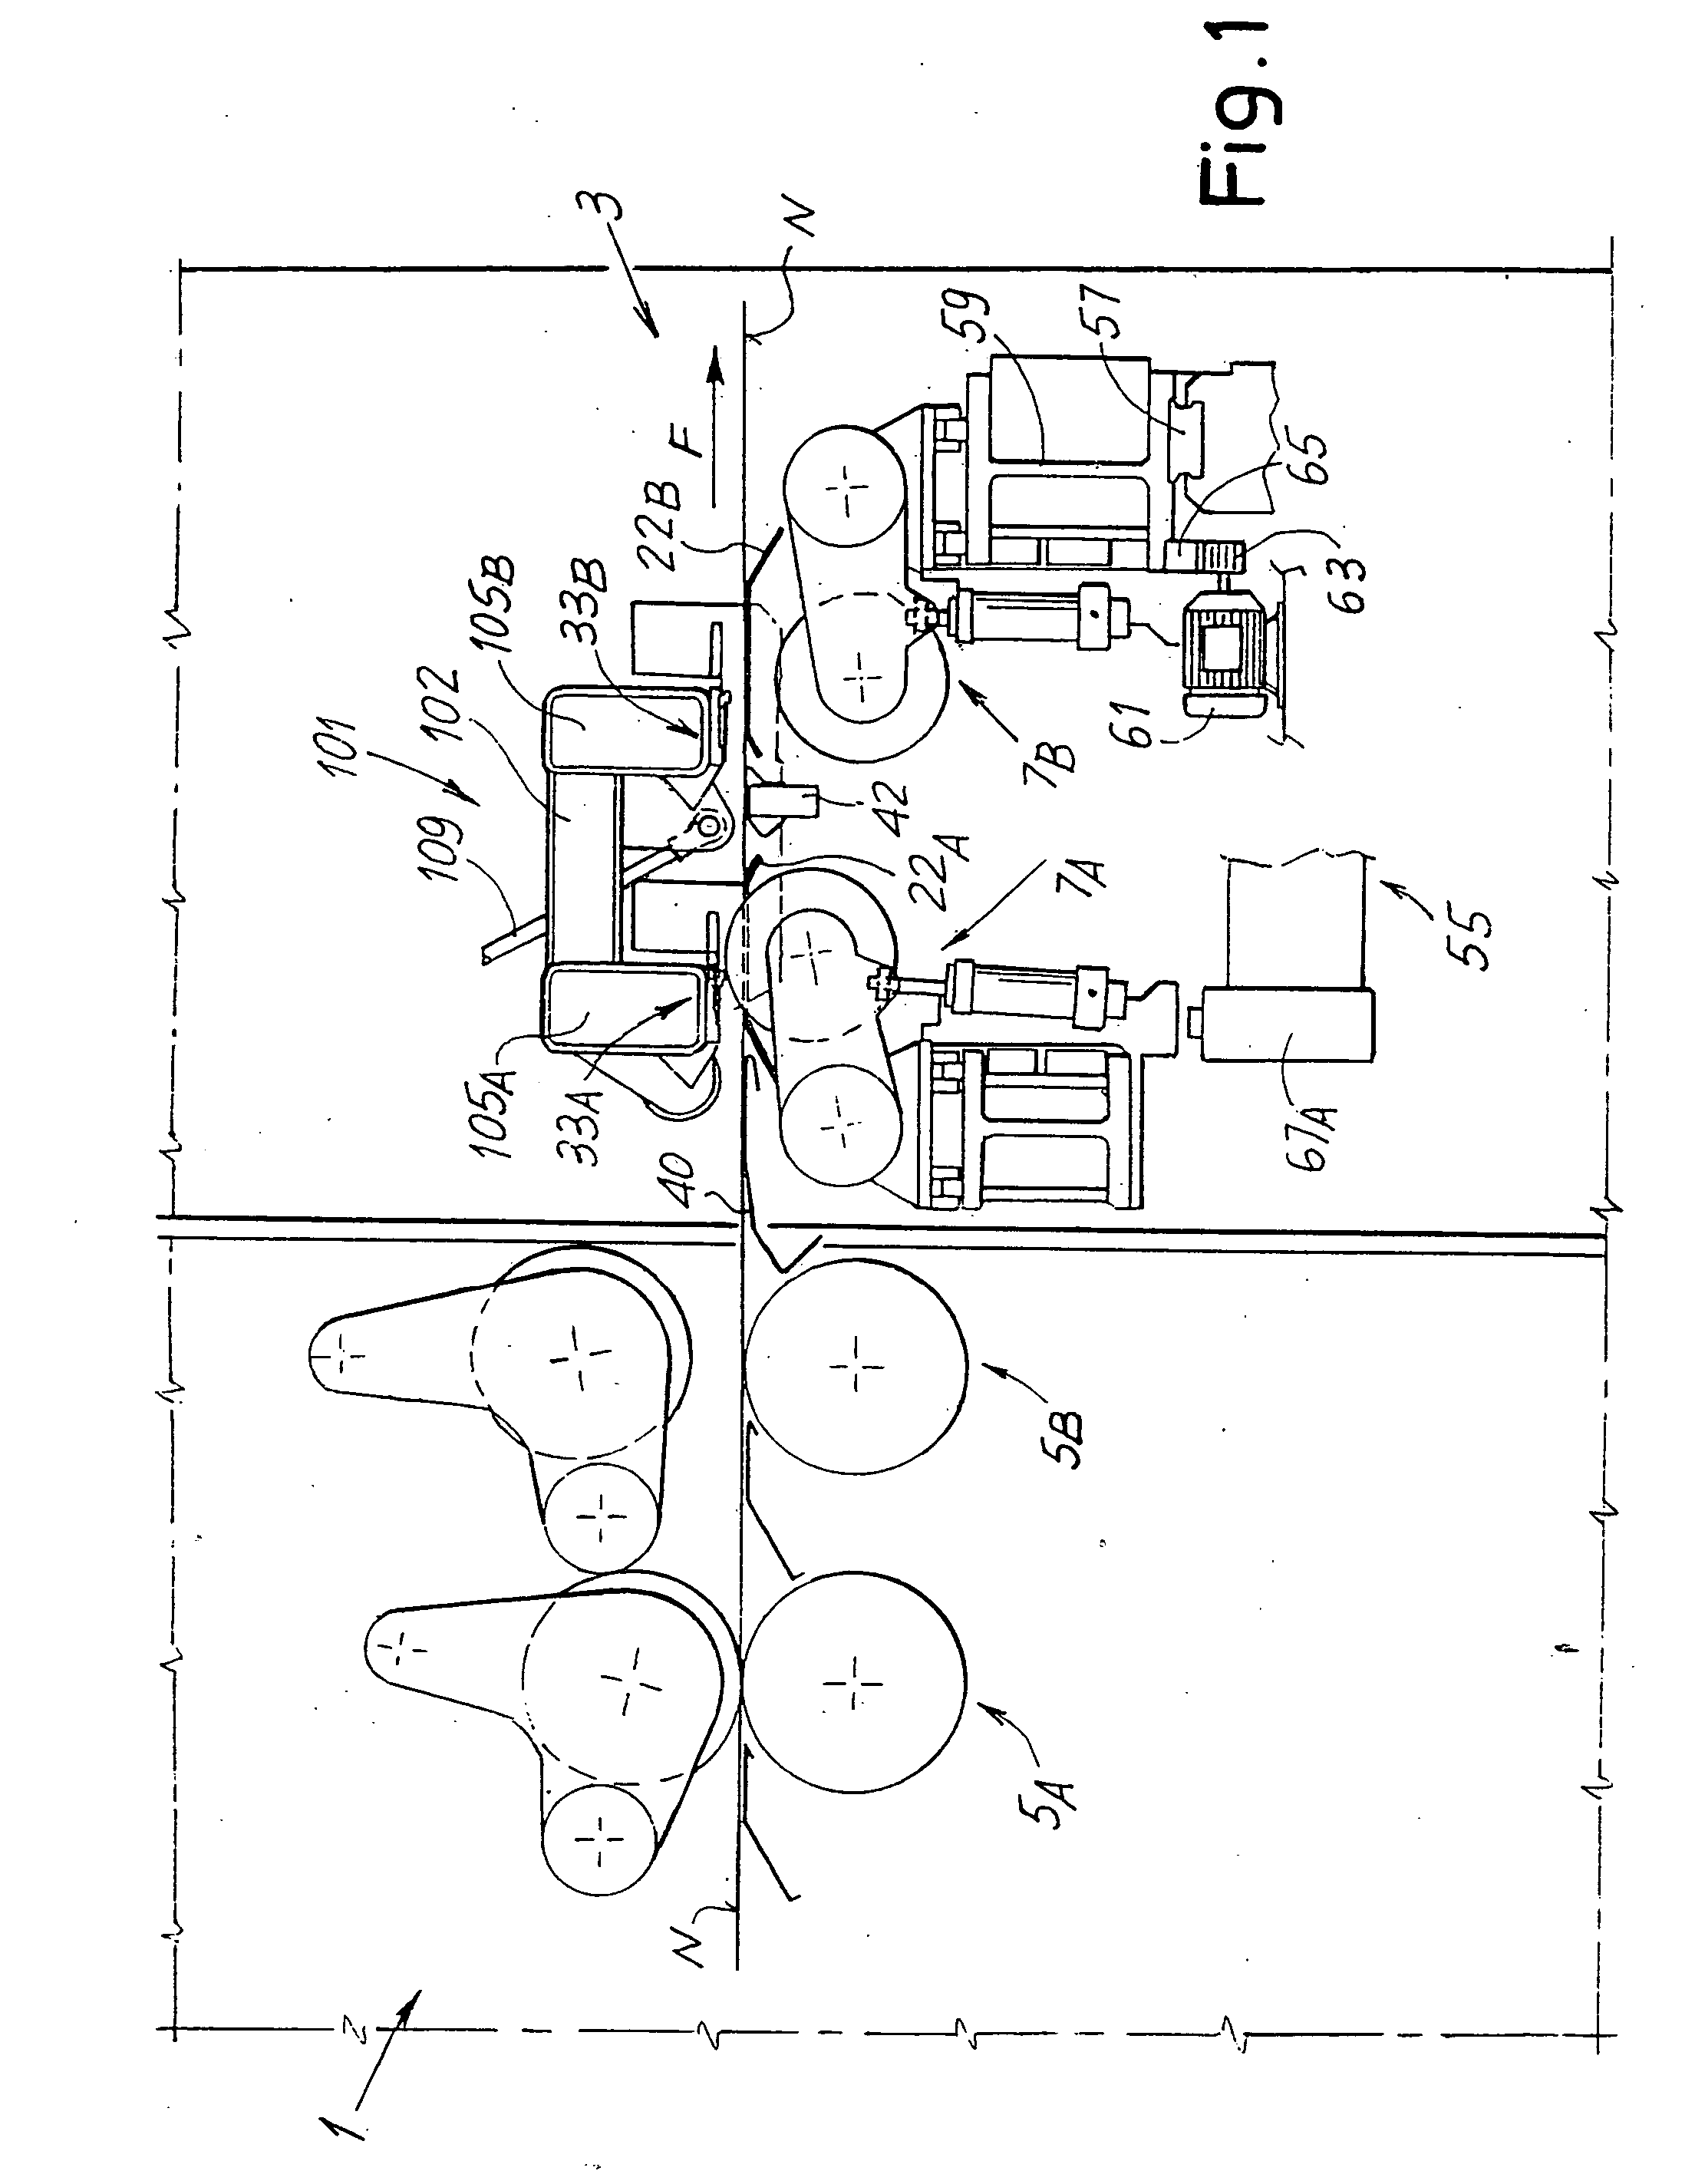 Device for longitudinal cutting of a continuous web material, such as corrugated cardboard